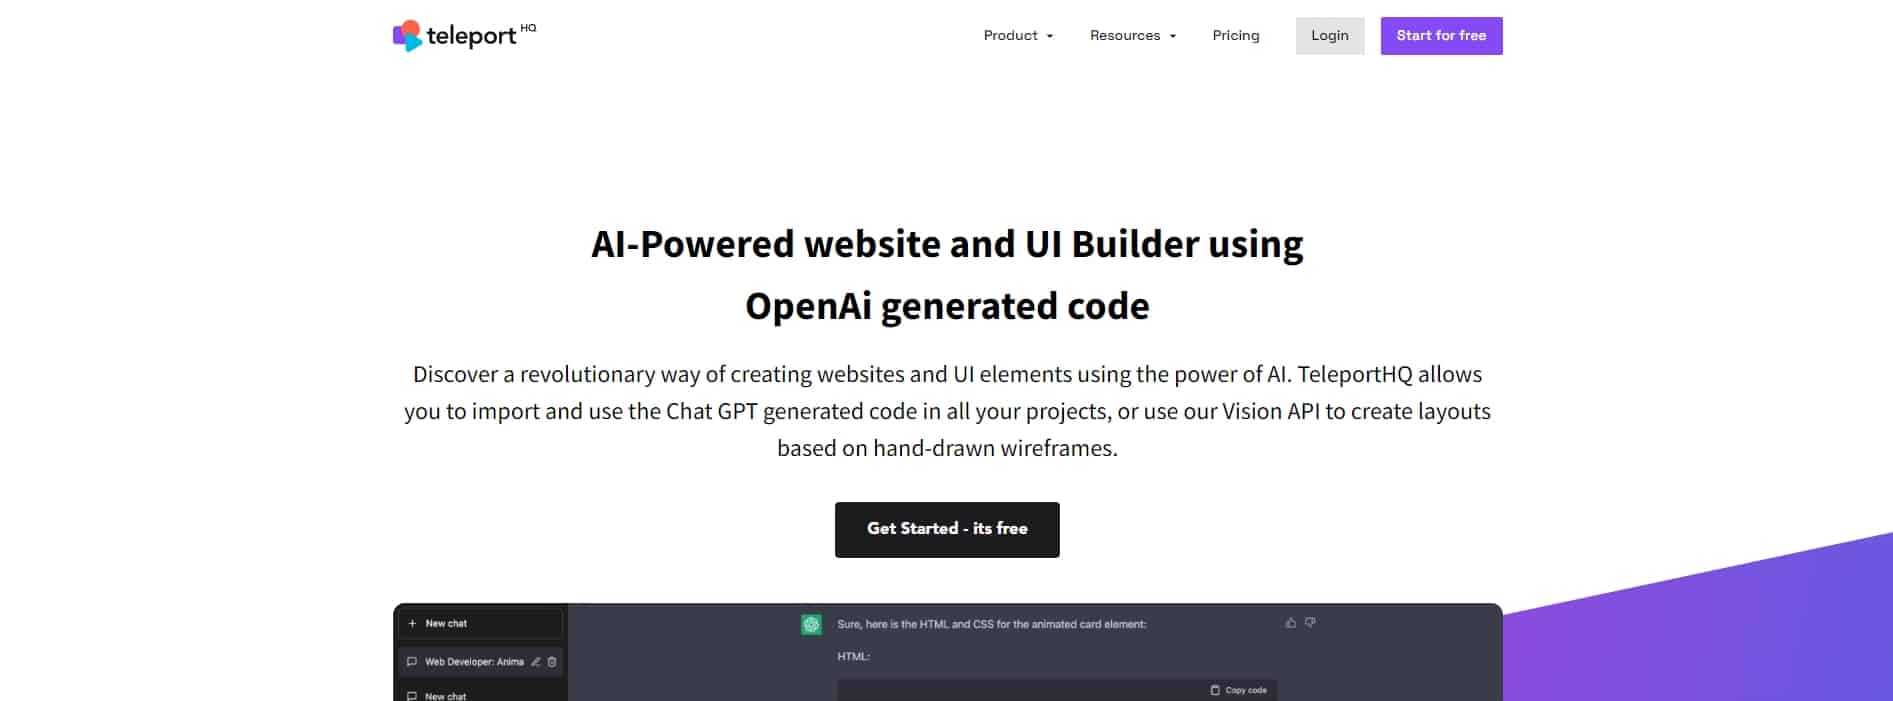 TeleportHQ ai website builder homepage